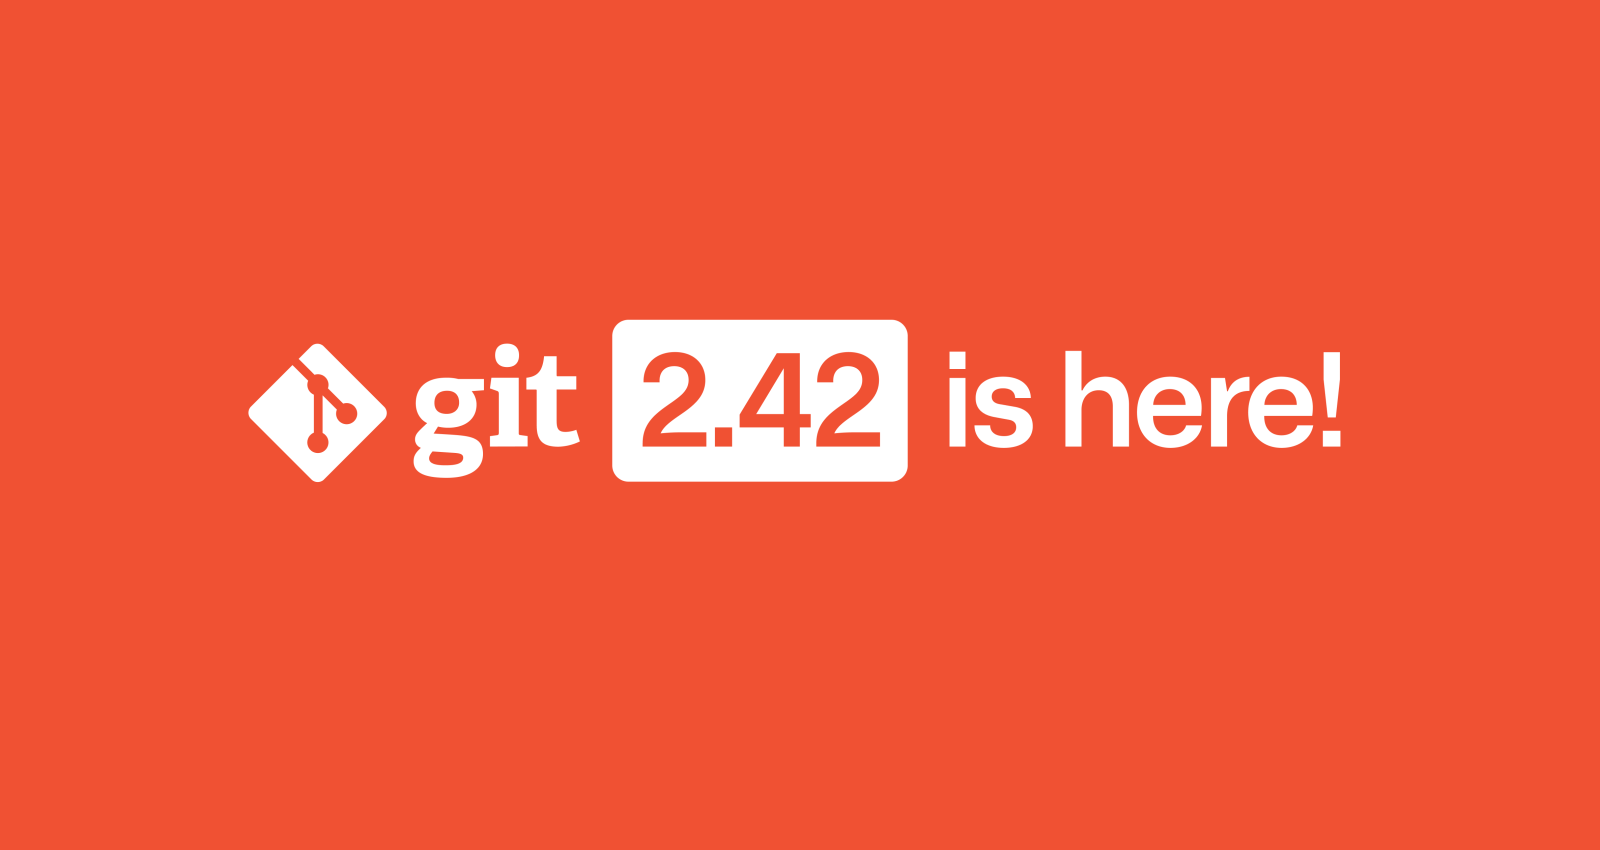 Highlights from Git 2.42